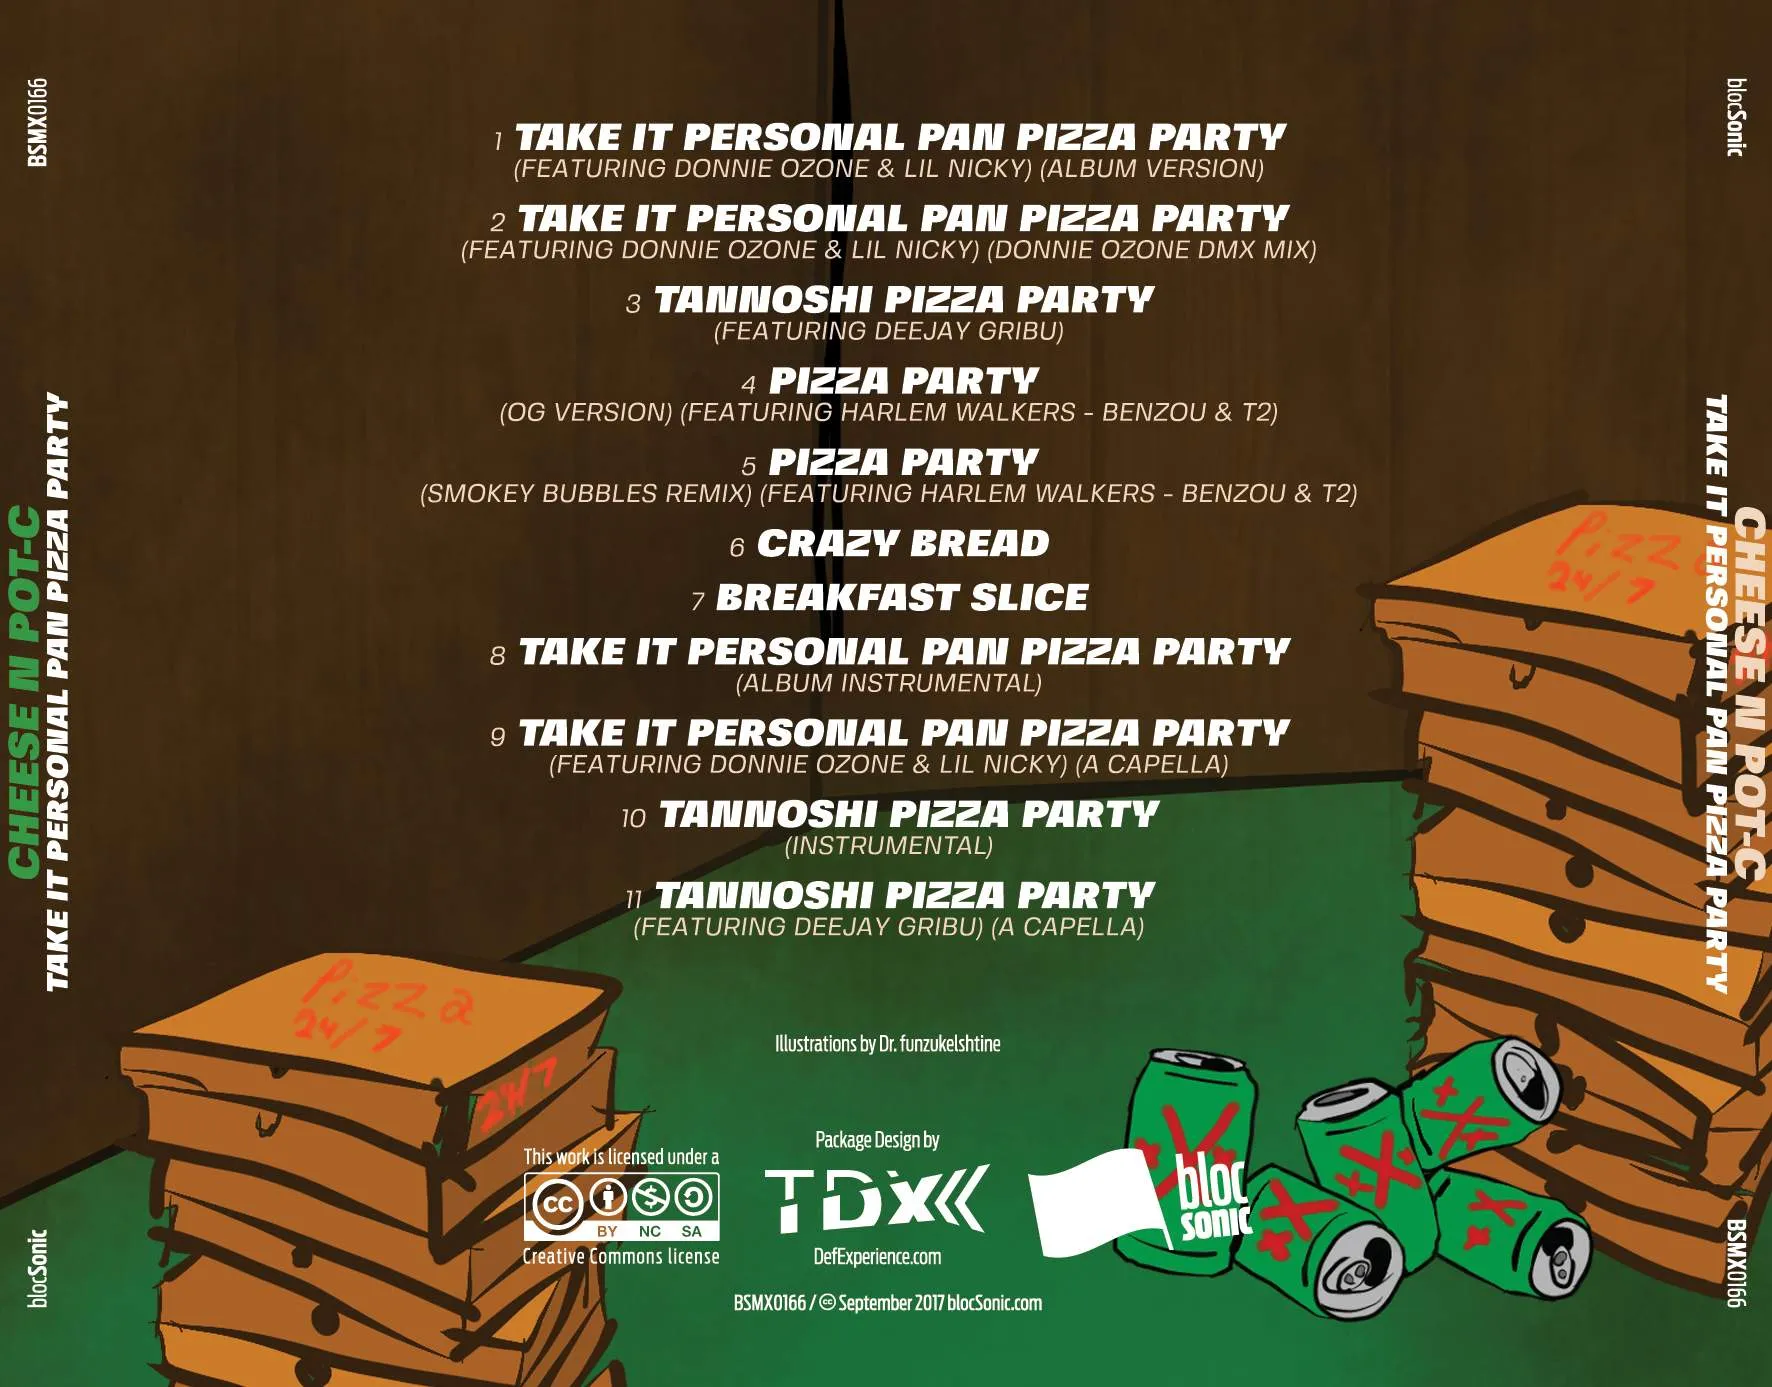 Album traycard for “Take It Personal Pan Pizza Party (Featuring Donnie Ozone &amp; Lil Nicky)” by Cheese N Pot-C